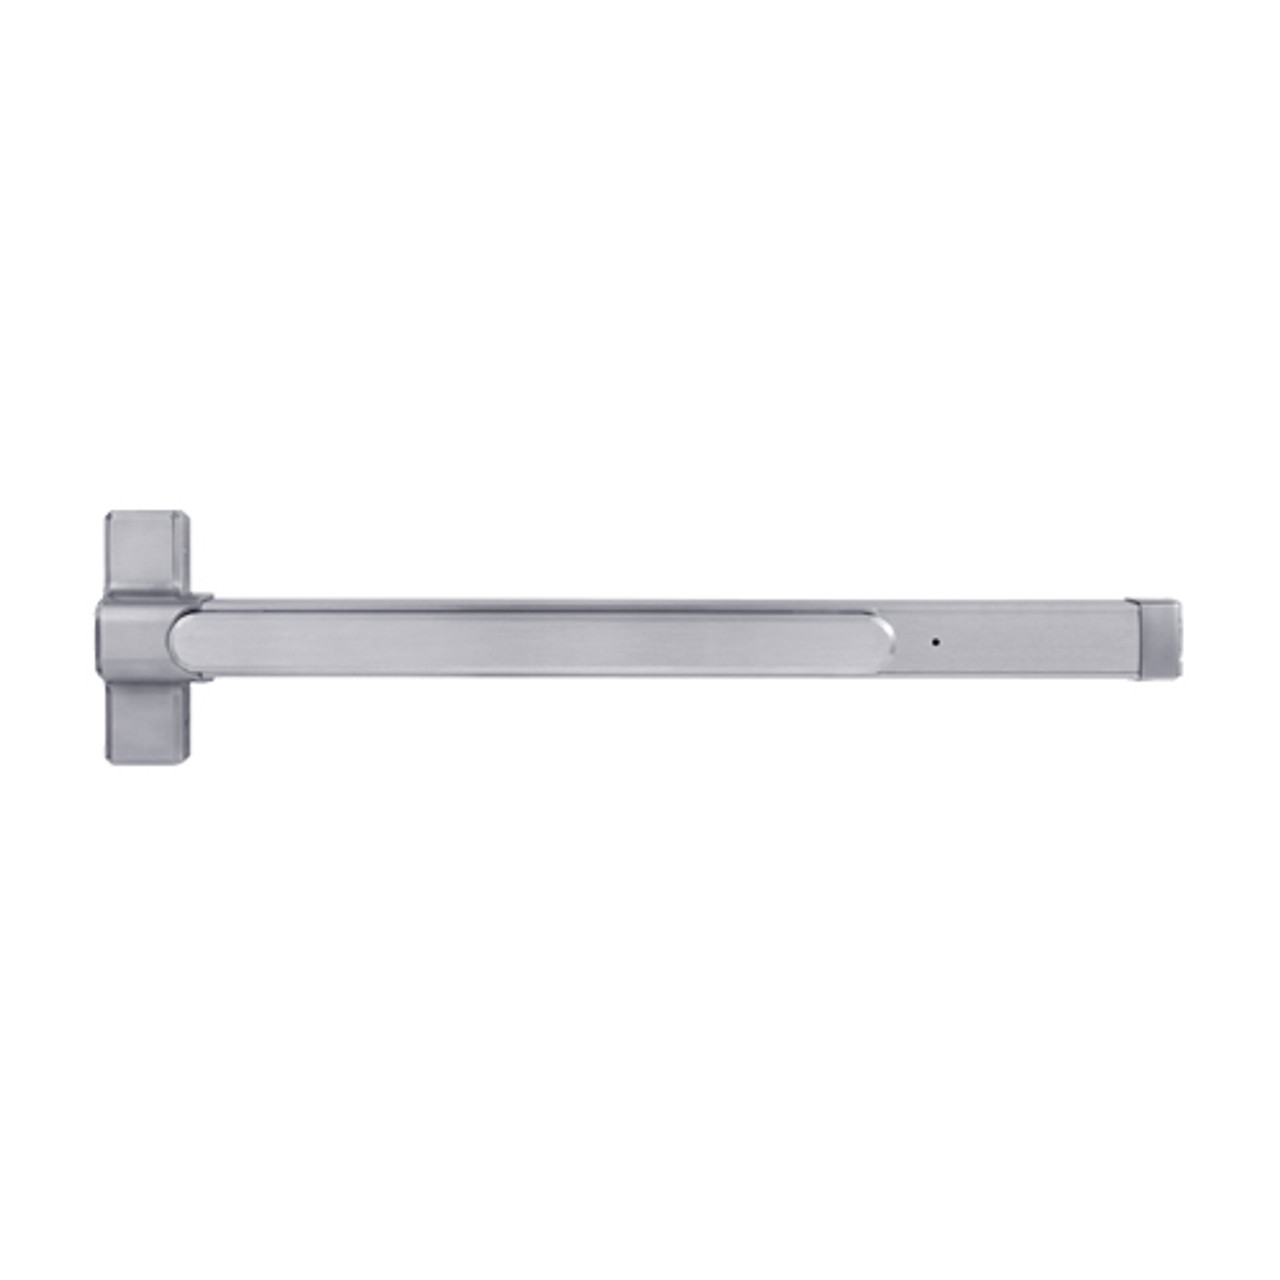 QED119LR-48-8-626 Stanley QED100 Series Heavy Duty Surface Vertical Rod Fire Rated Exit Device in Satin Chrome Finish